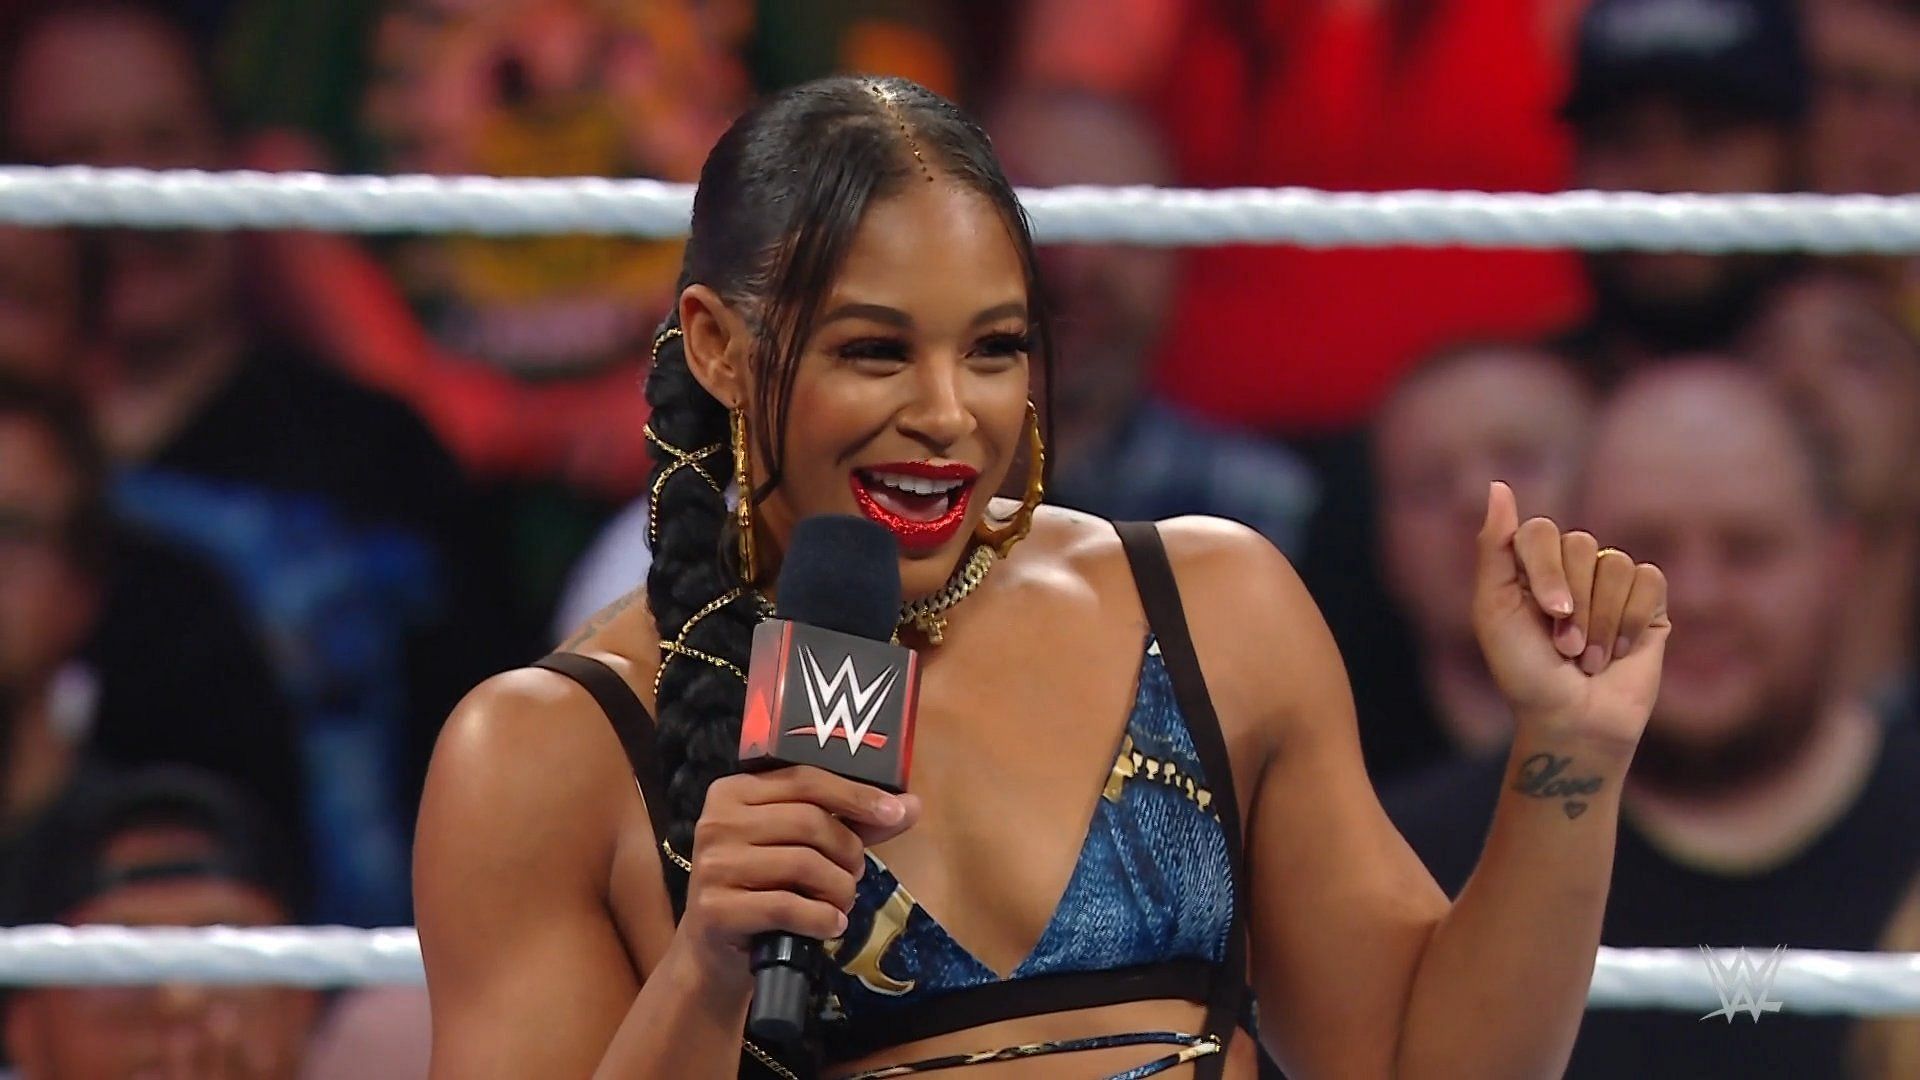 Bianca Belair is a top competitor